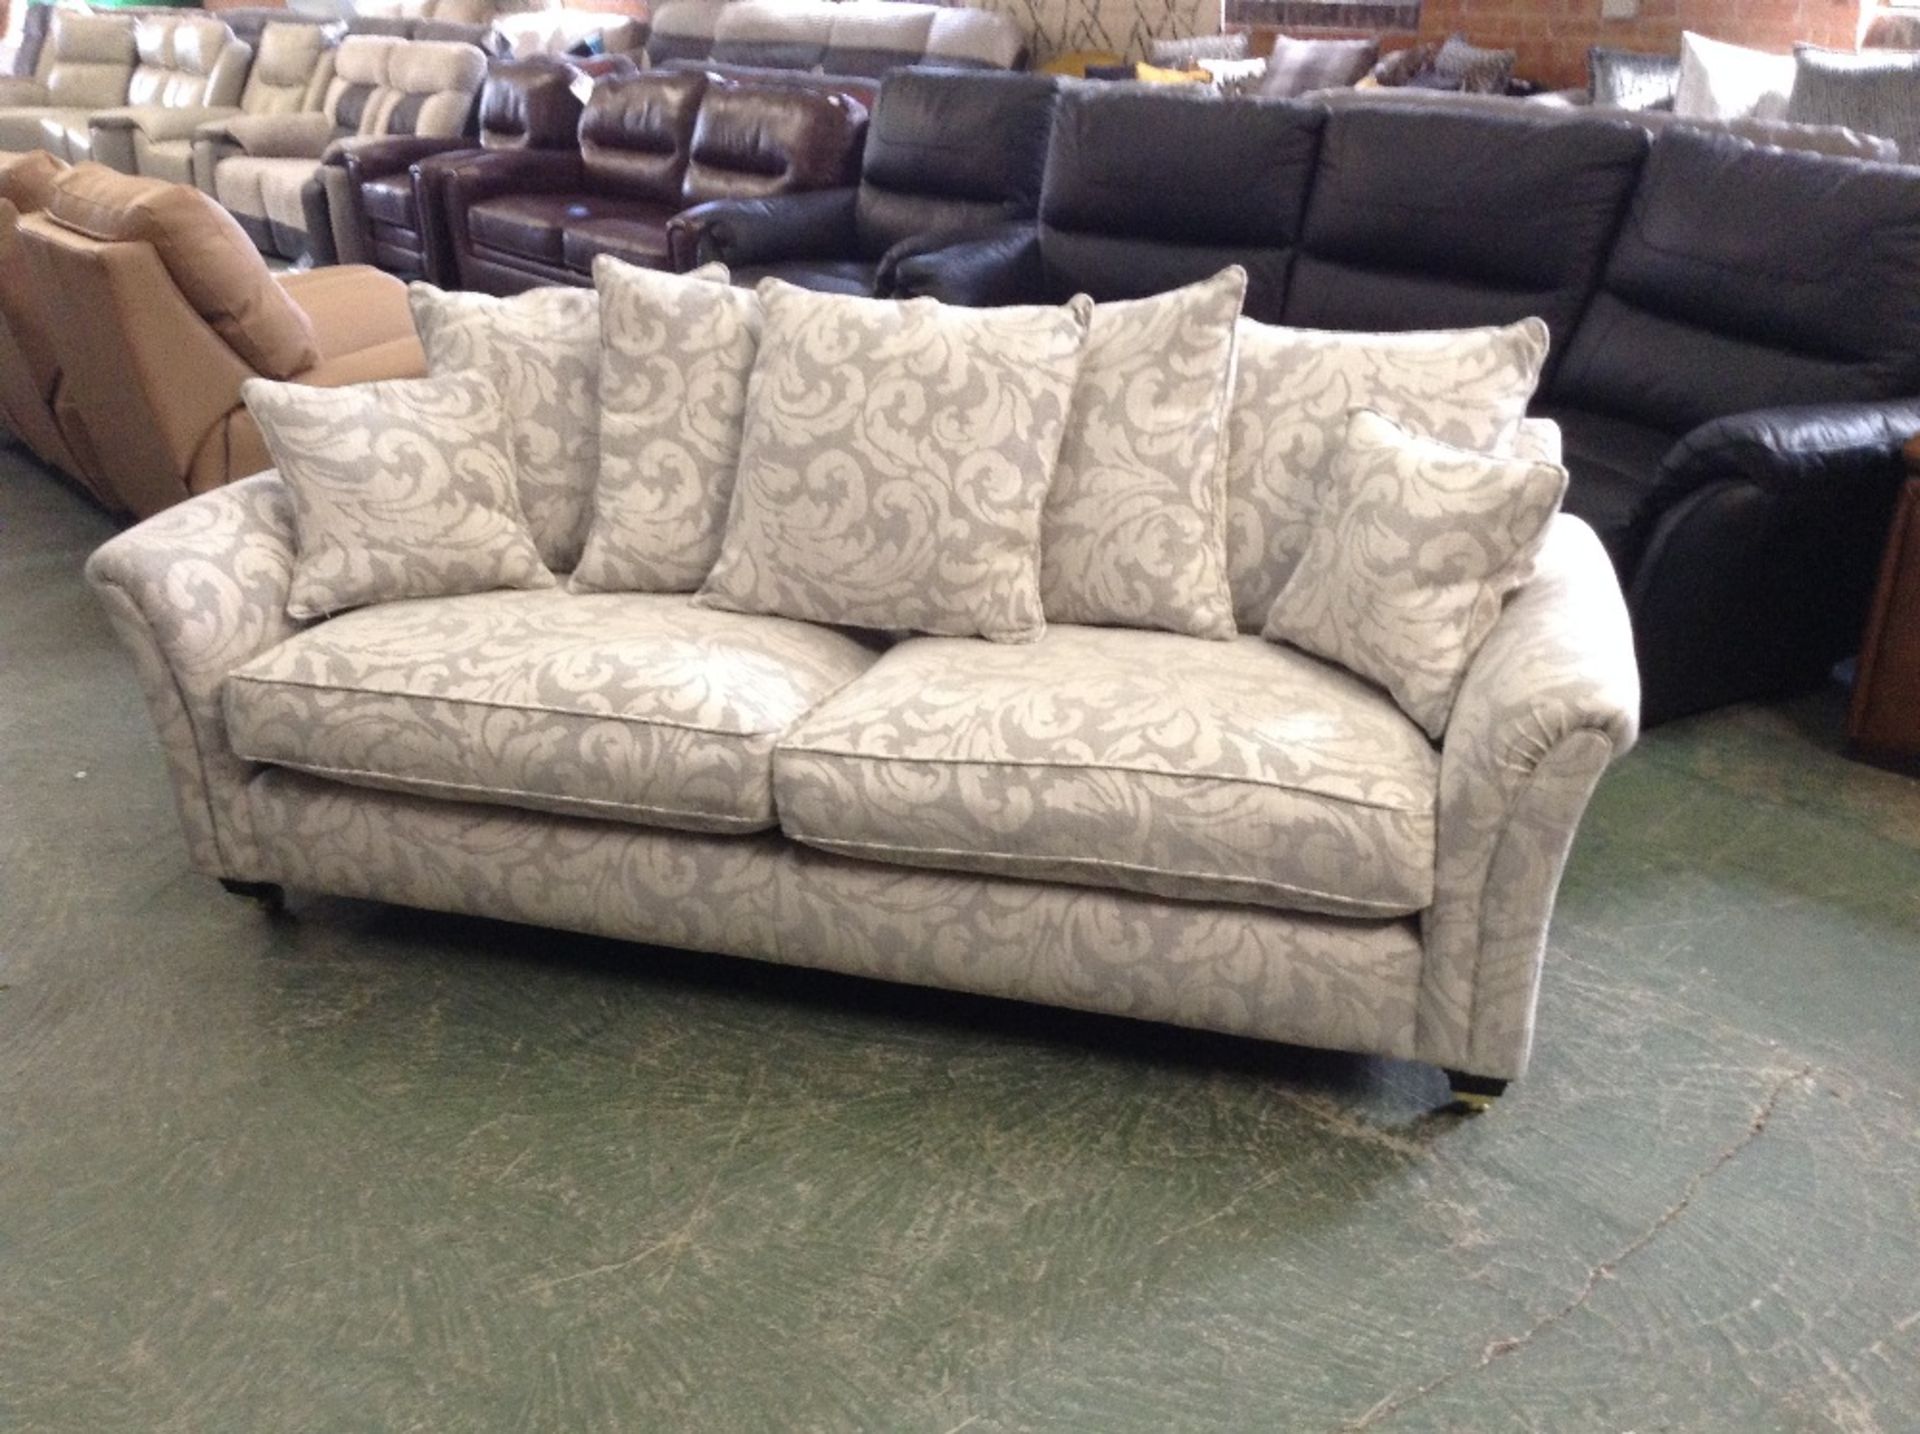 SILVER PATTERNED LARGE 2 SEATER SOFA (TR001727 W00